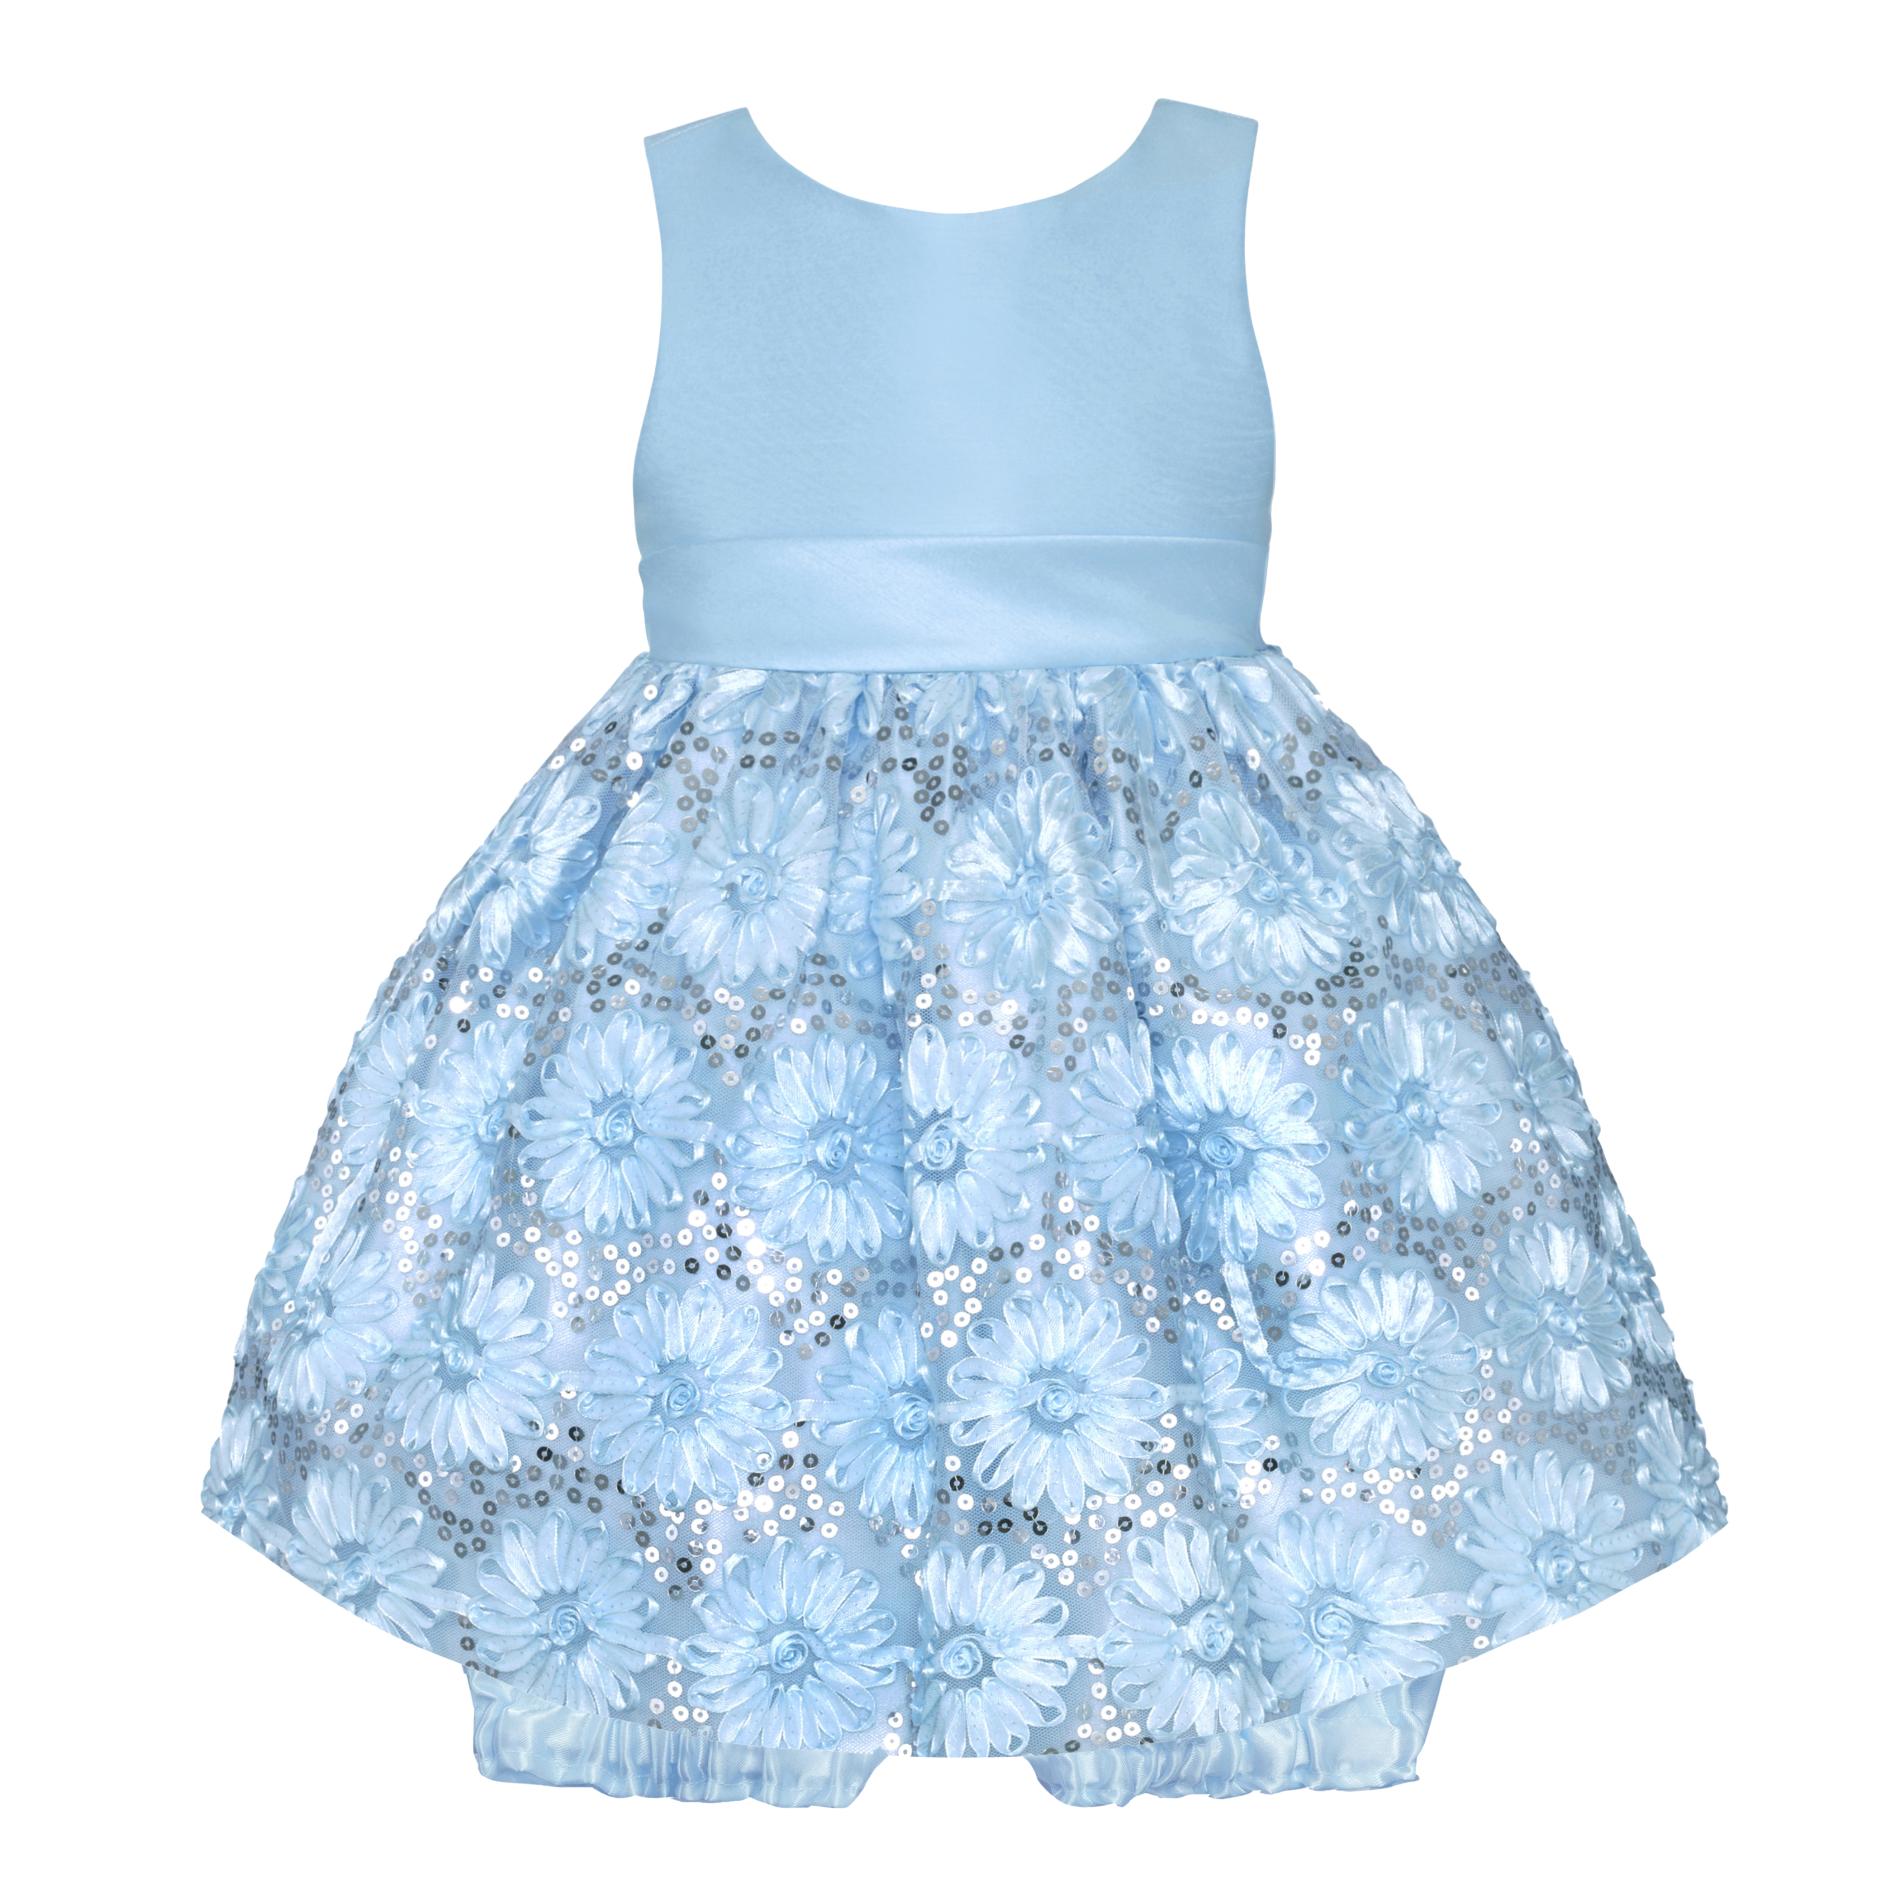 American Princess Infant Girl's Party Dress & Diaper Cover - Floral & Sequins